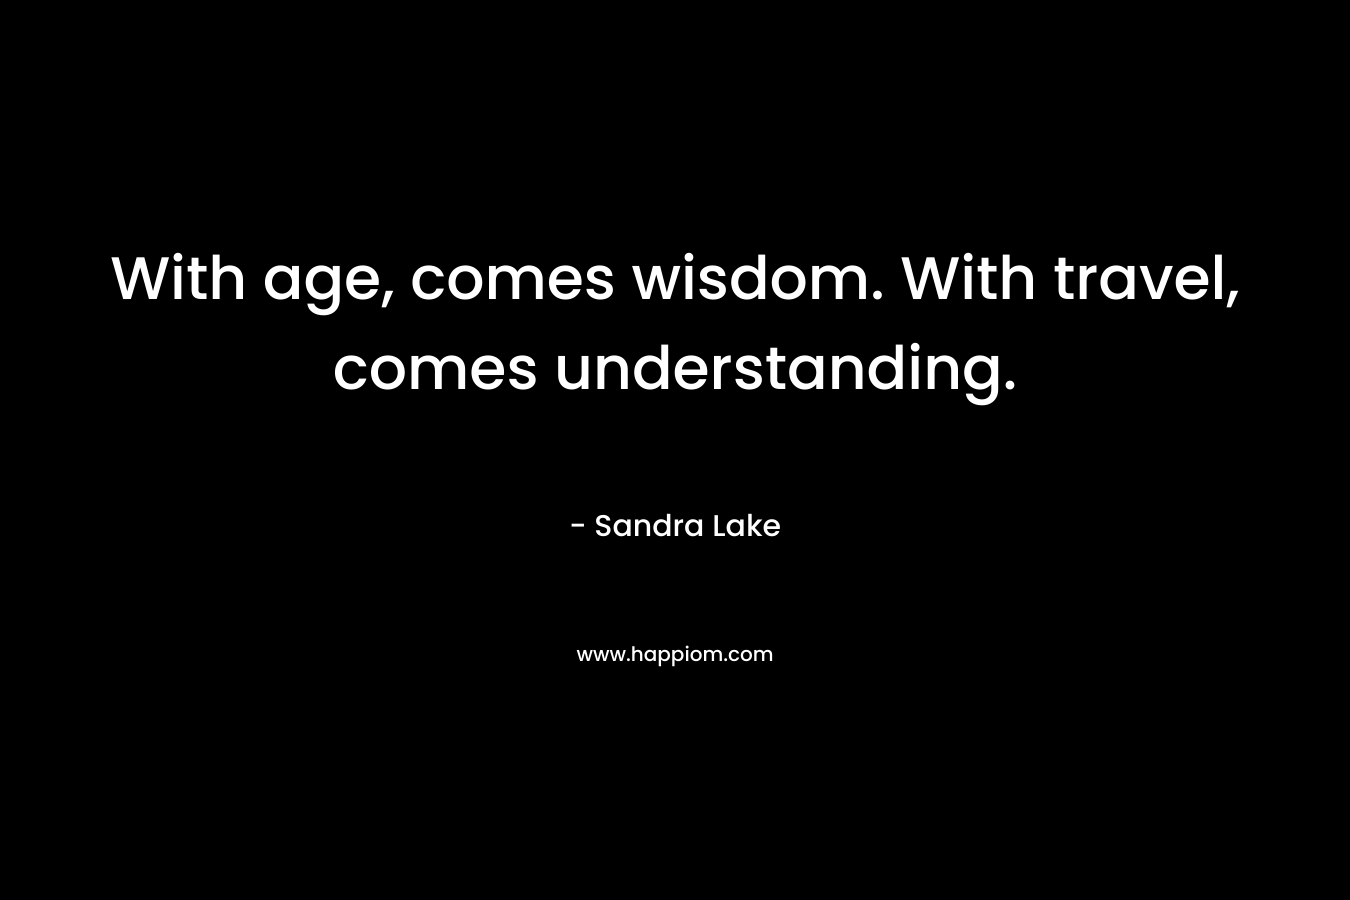 With age, comes wisdom. With travel, comes understanding.